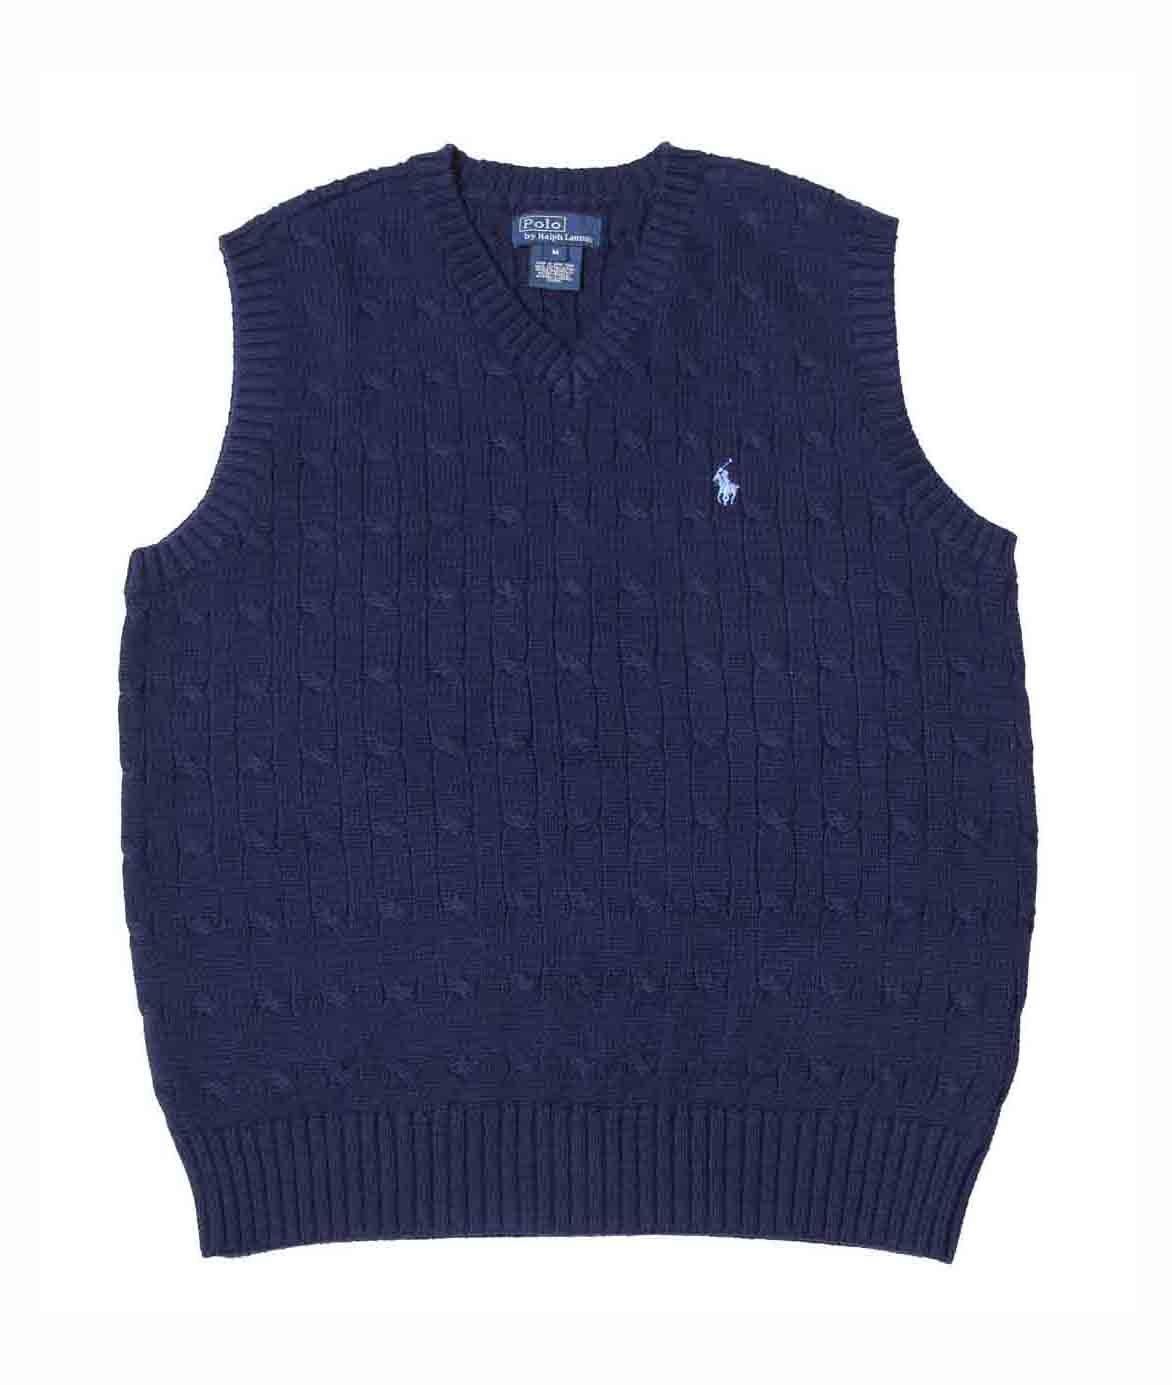 Boy's Child's Polo by Ralph Lauren Sweater Vest Navy Blue Cable Knit V ...